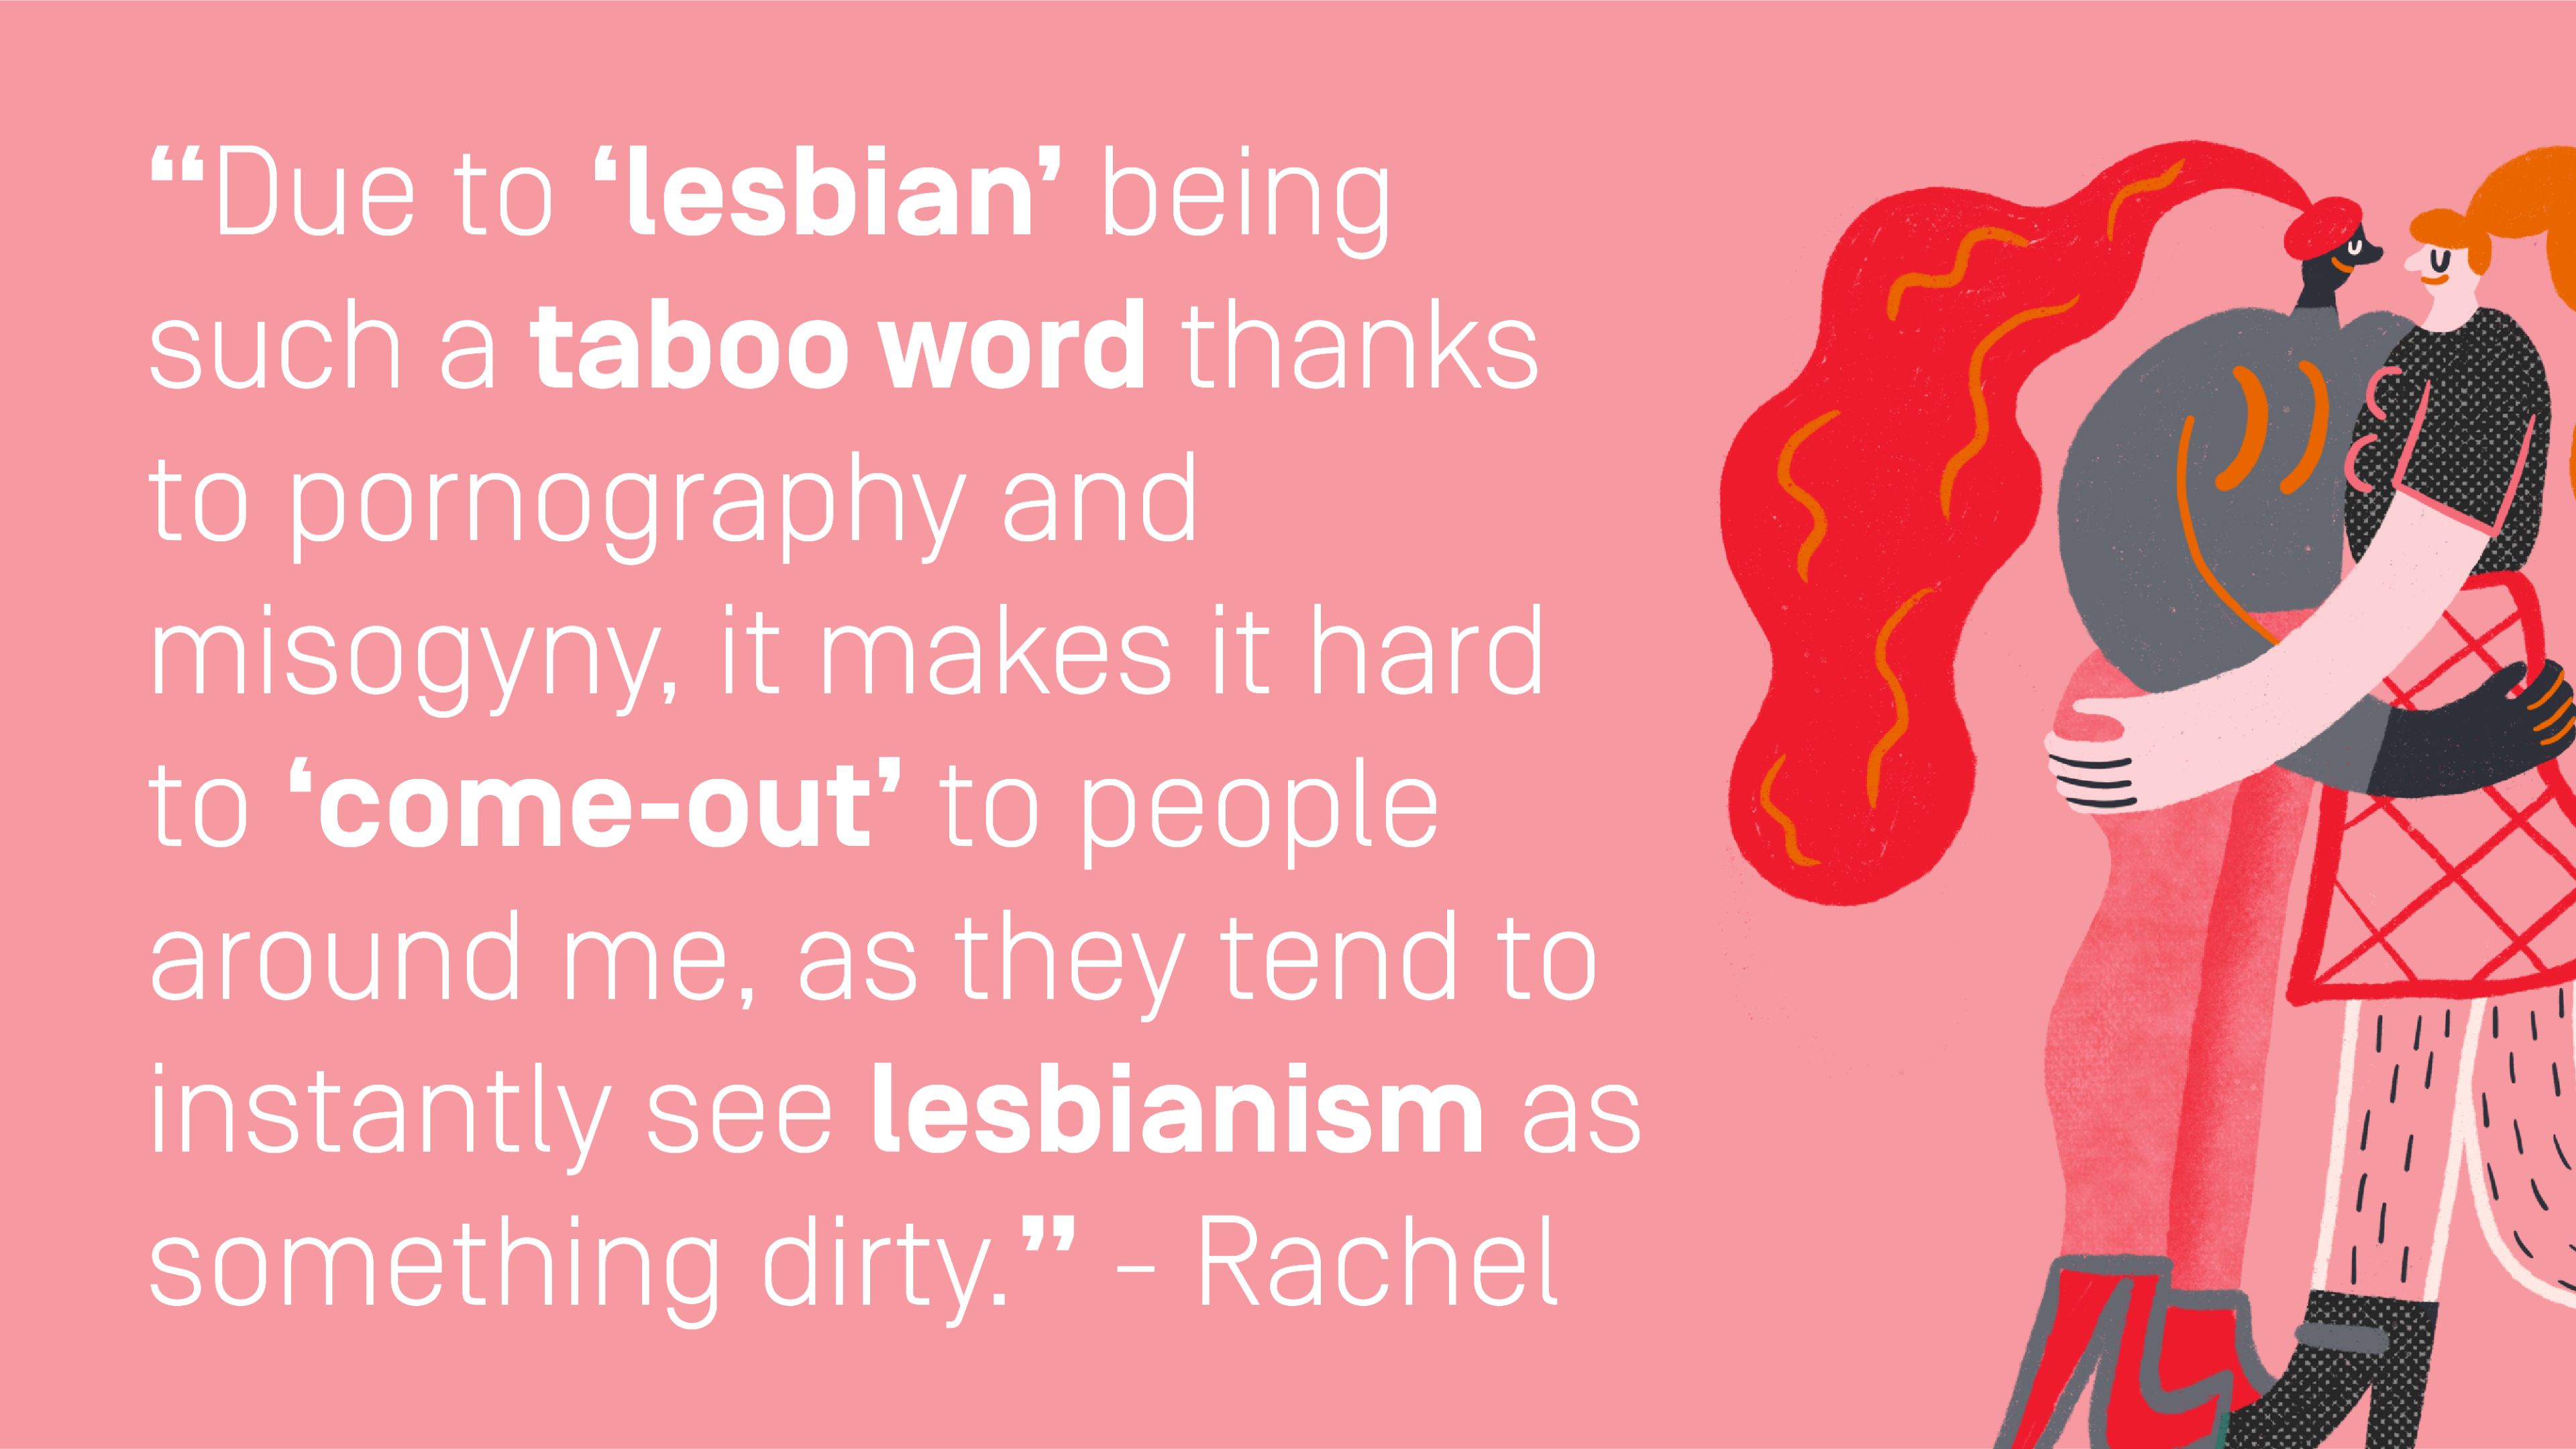 Quote by Rachel: "Due to ‘lesbian’ being such a taboo word thanks to pornography and misogyny, it makes it hard to ‘come-out’ to people around me, as they tend to instantly see lesbianism as something dirty."